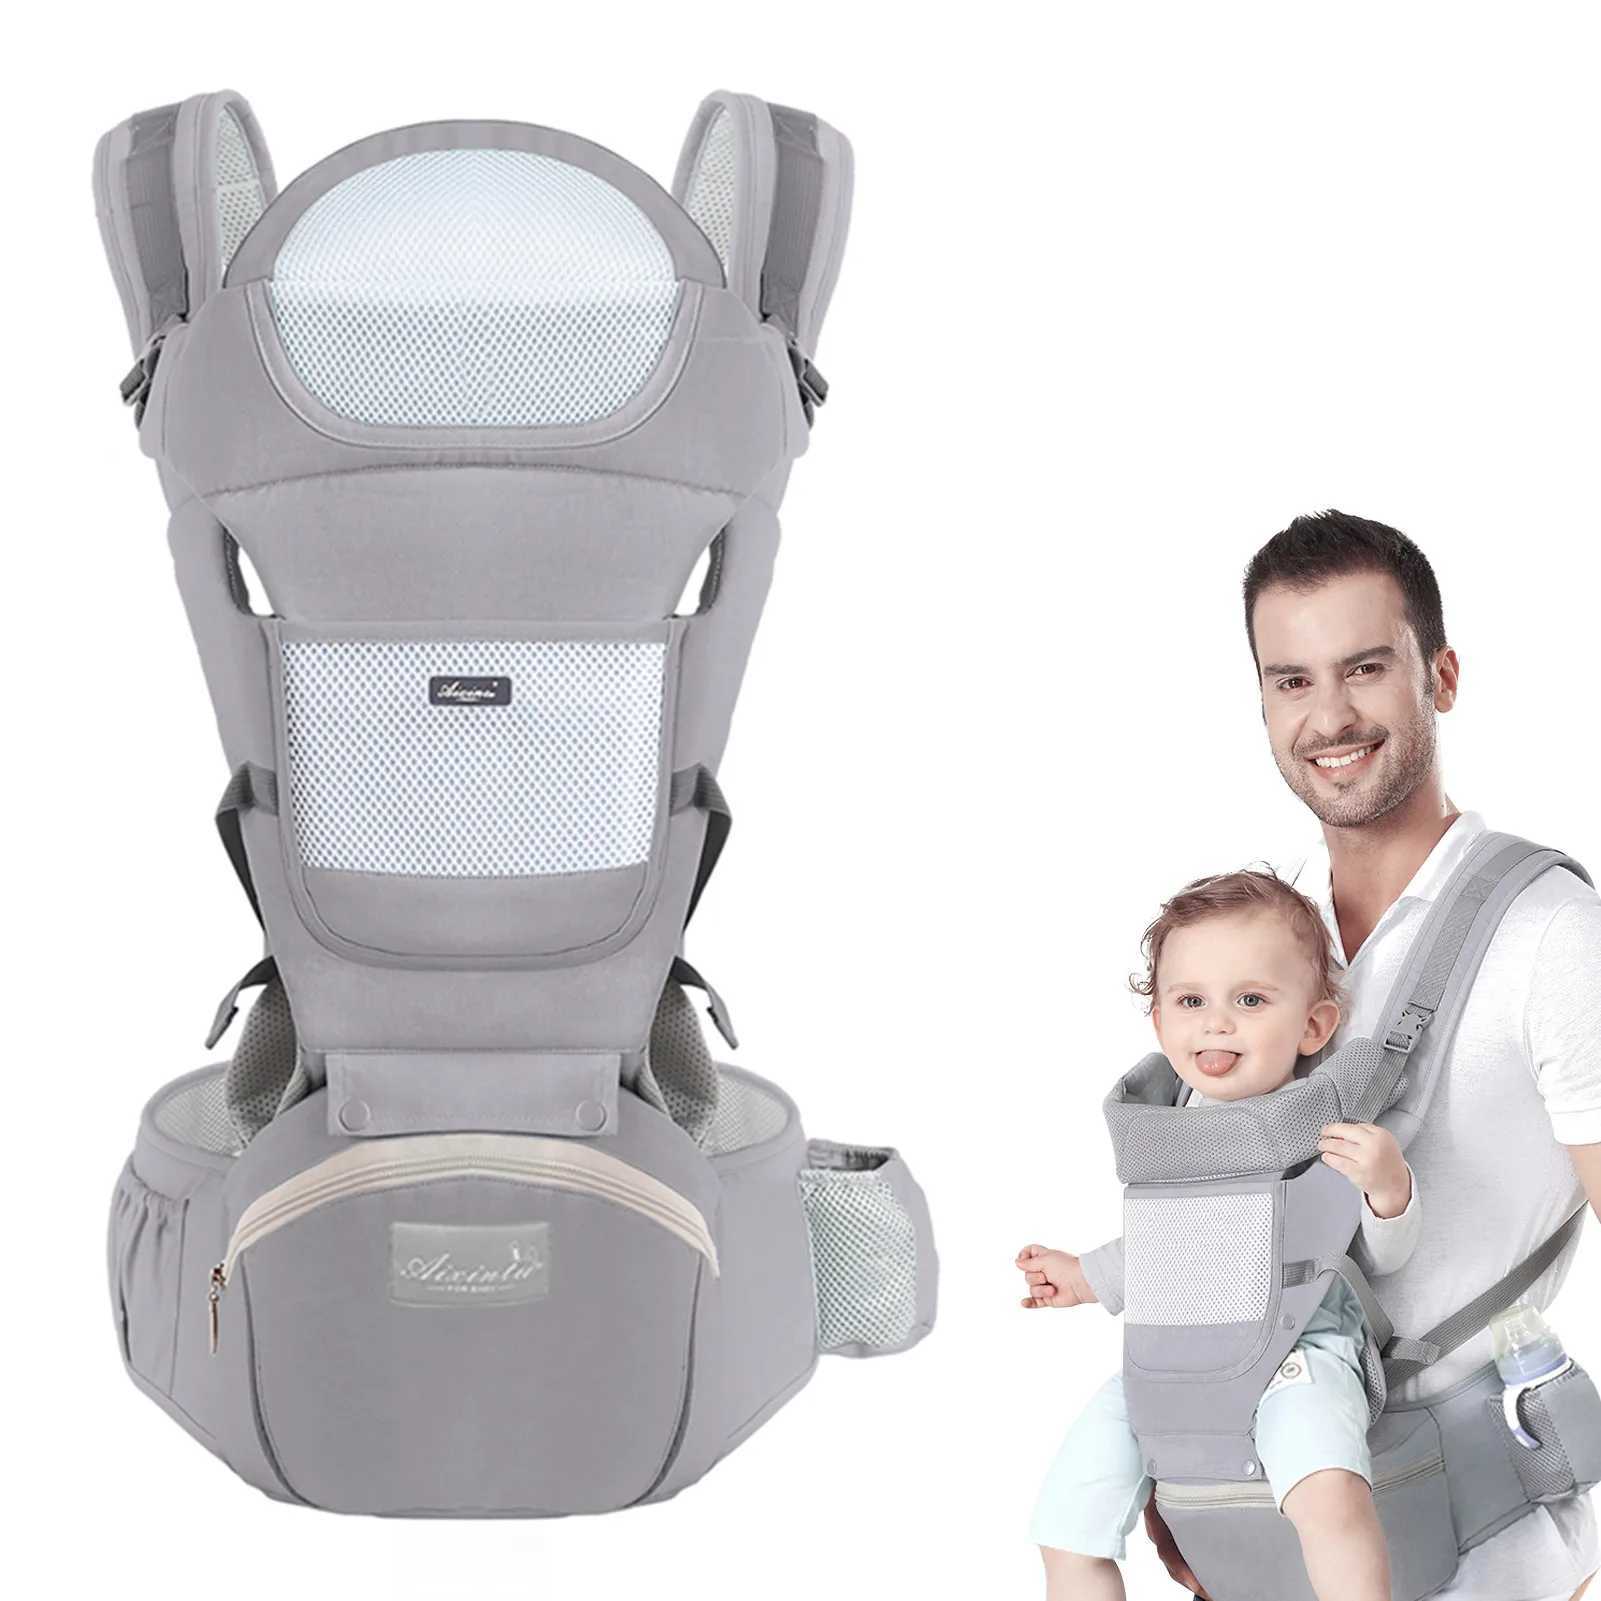 Carriers Slings Backpacks Baby Carrier ErgonomicInfant Multifunctional Waist StoolNewborn To Toddler Multiuse Before and After Kangaroo Bag Accessories Y24051